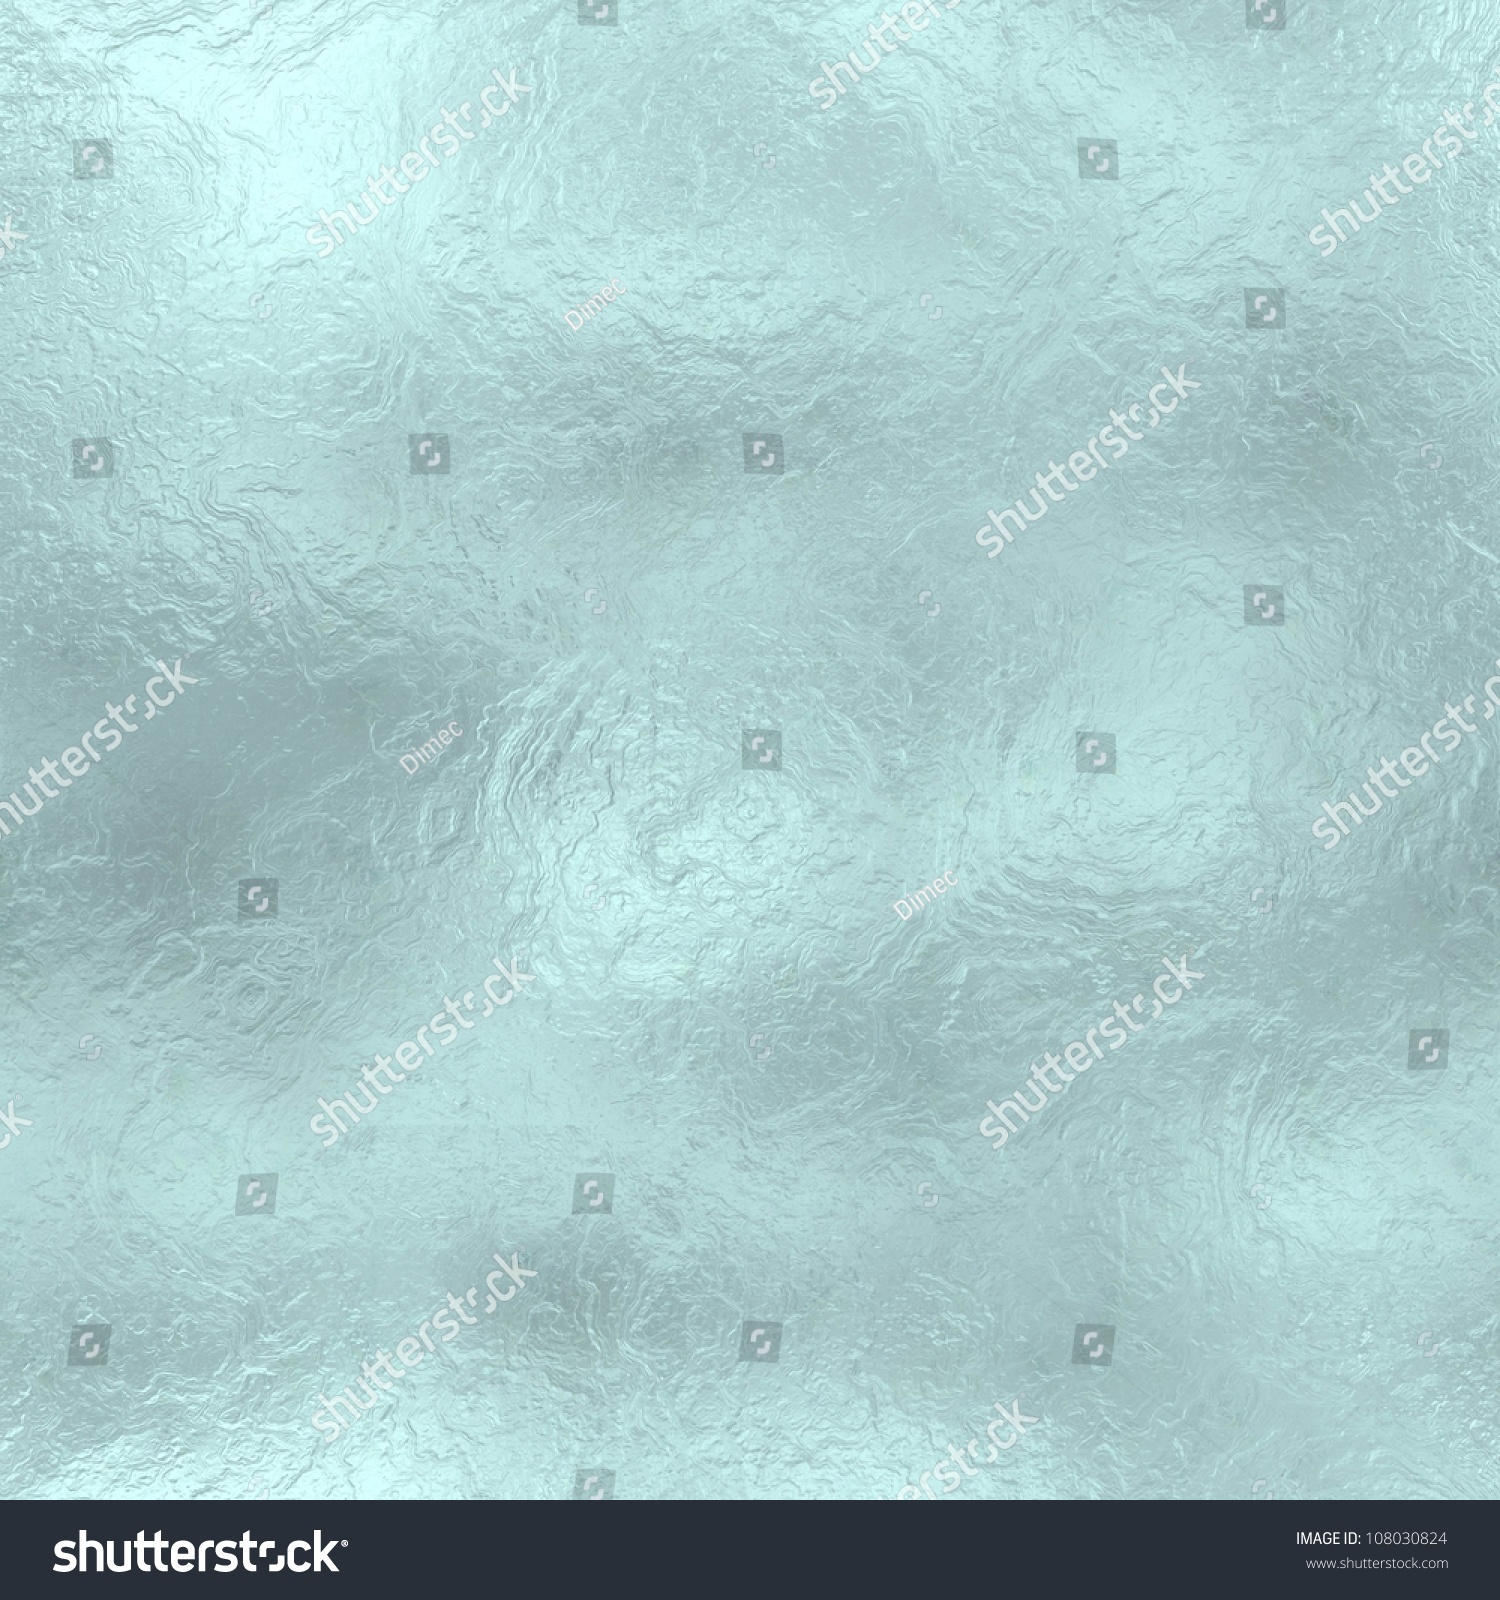 Seamless Hires 5000x5000 Water Texture Stock Illustration 108030824 ...